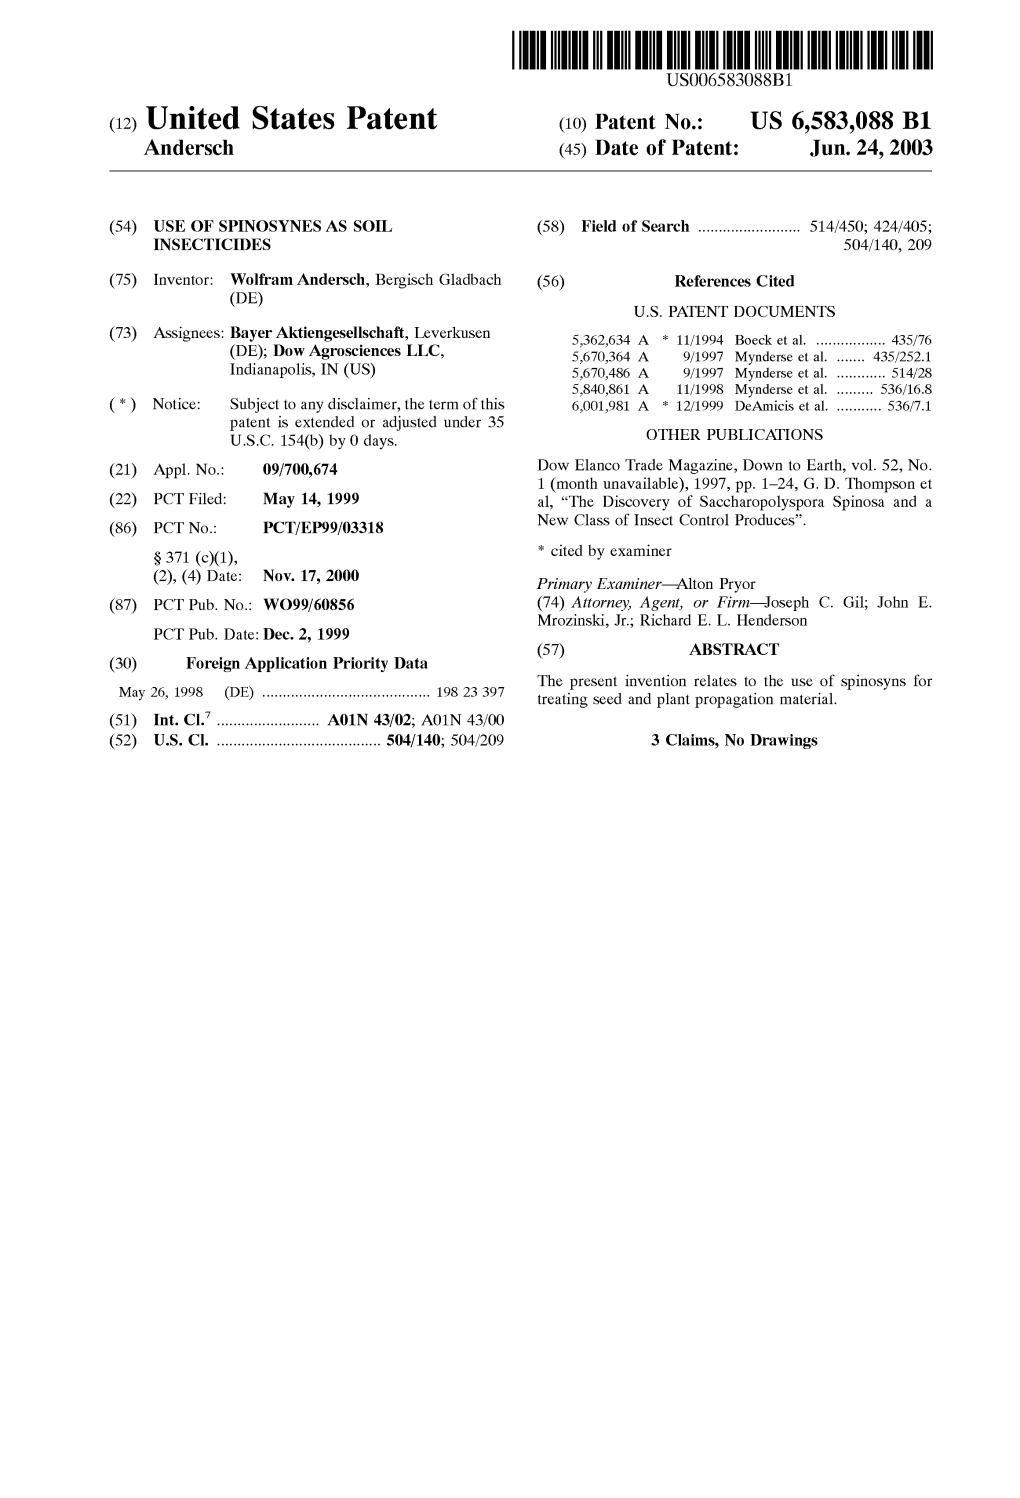 (12) United States Patent (10) Patent No.: US 6,583,088 B1 Andersch (45) Date of Patent: Jun